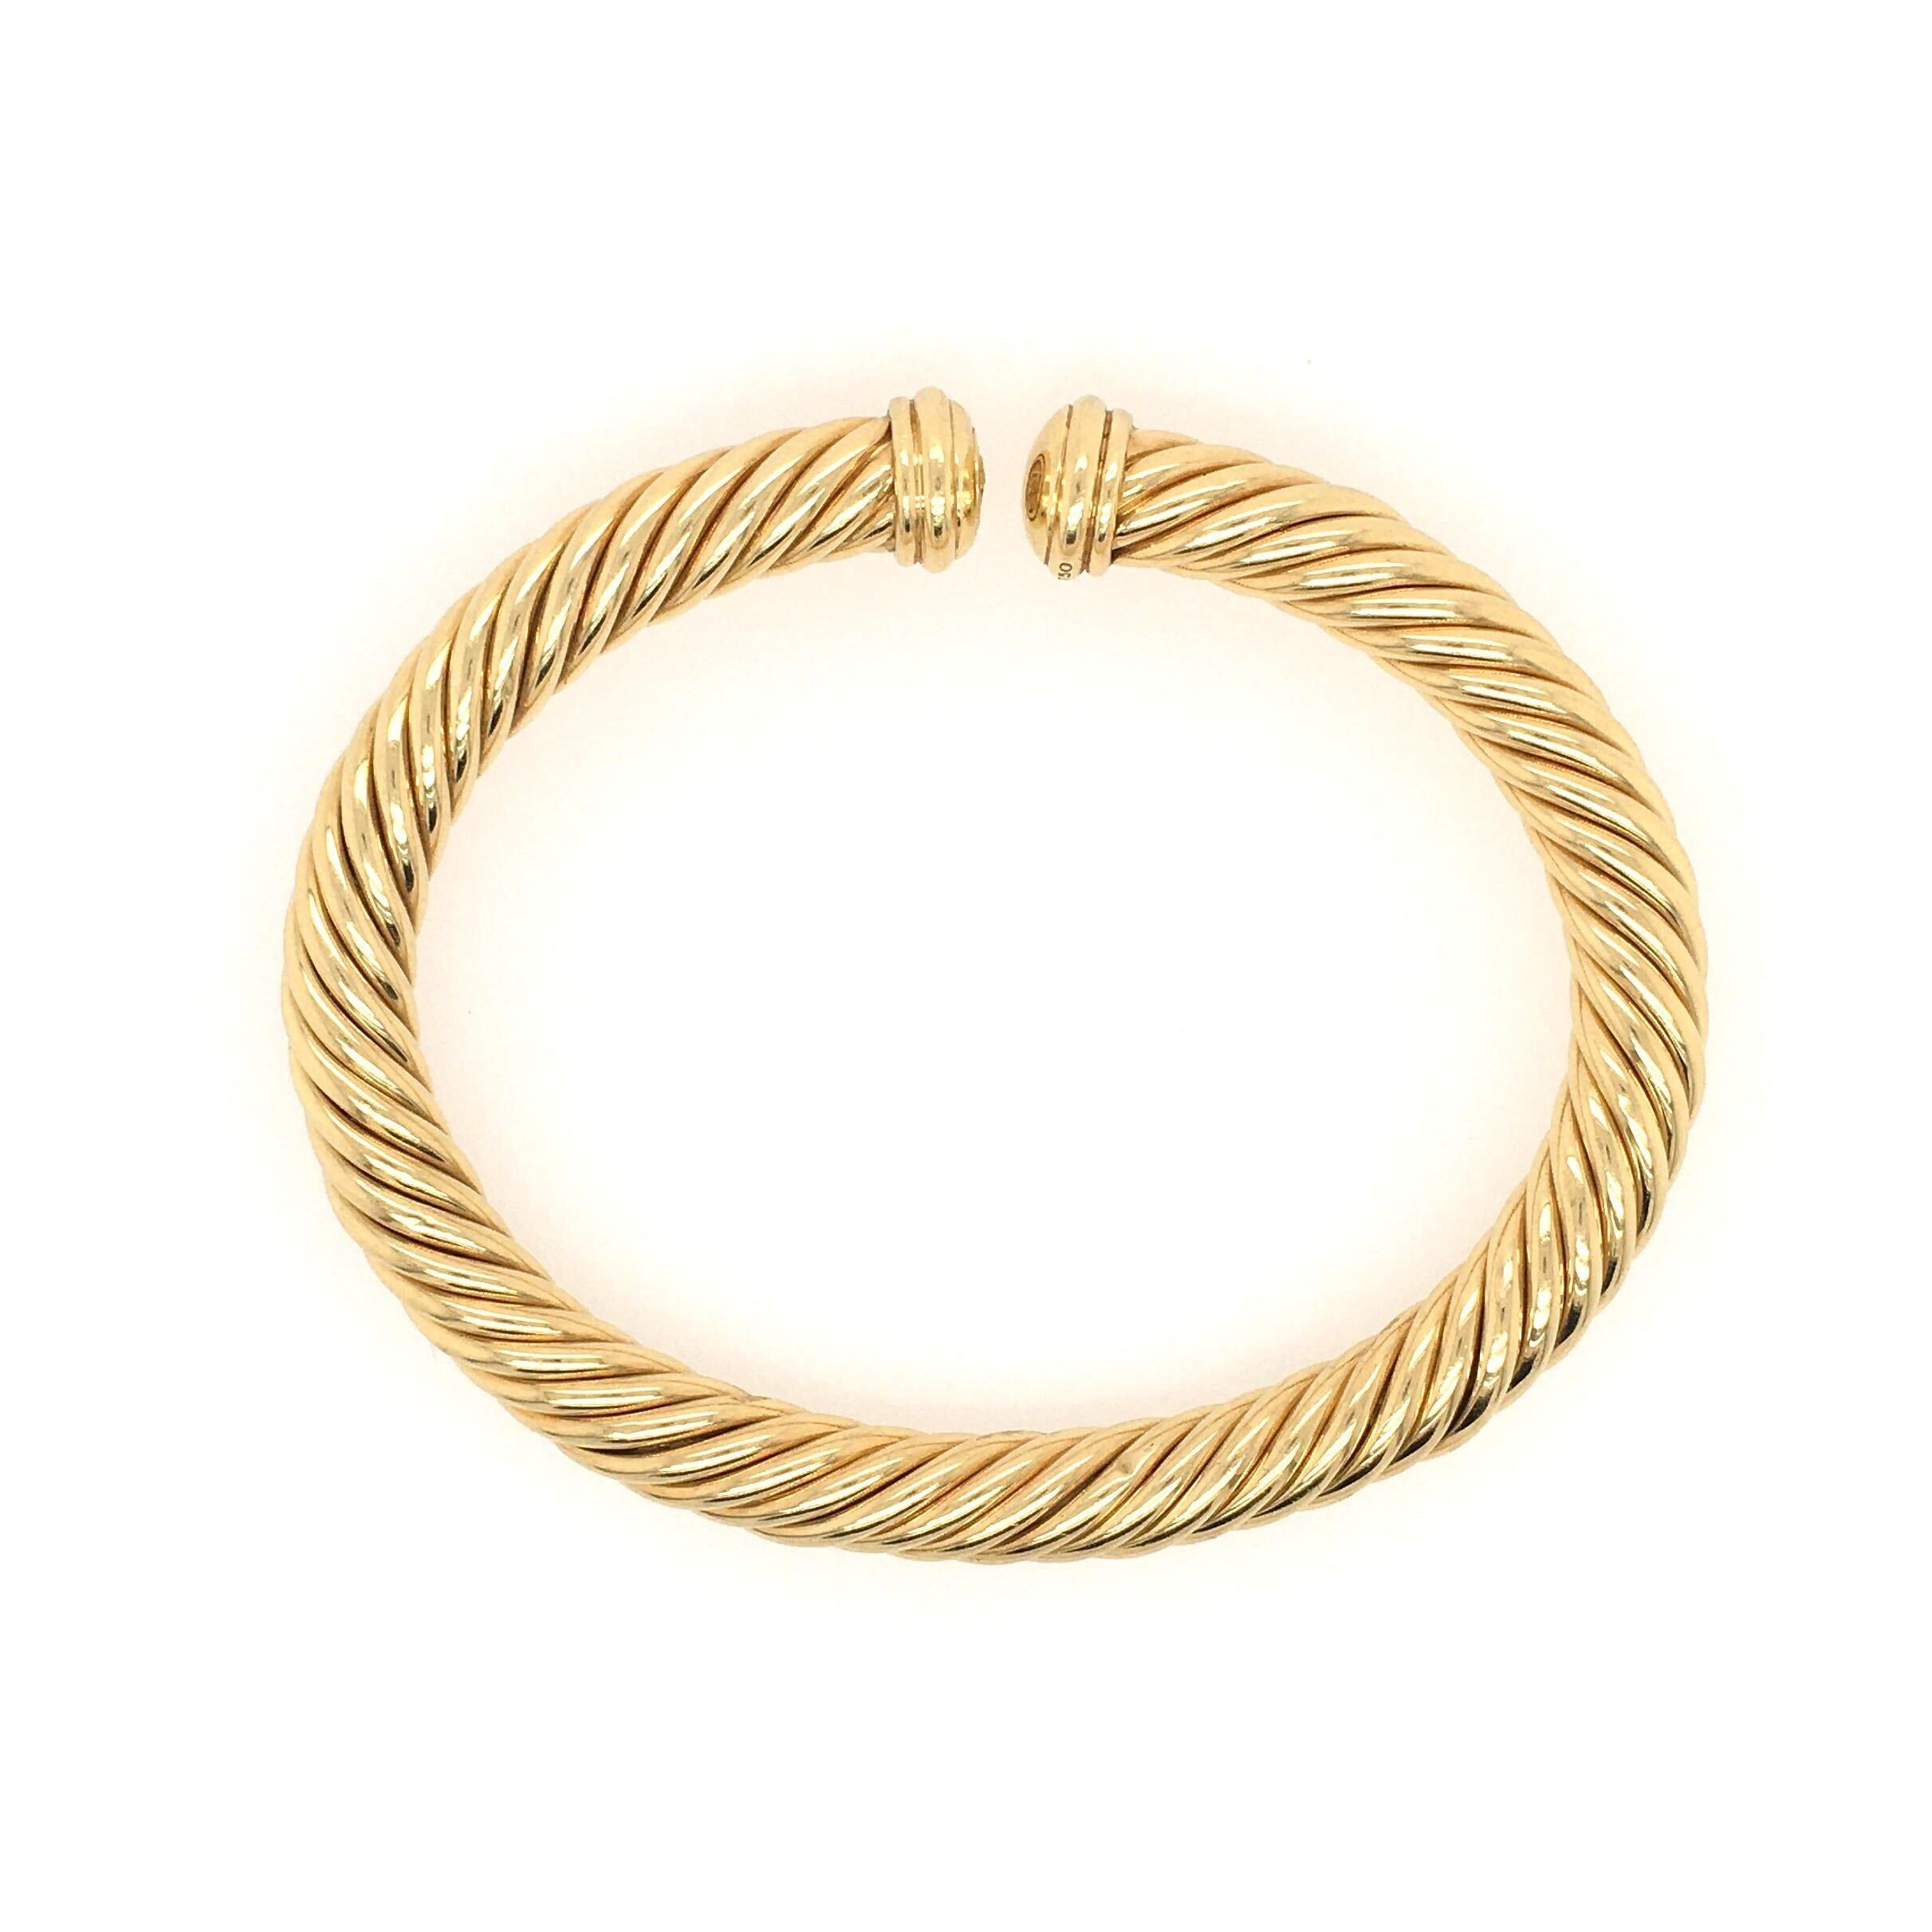 An 18 karat yellow gold Cable Spira Bracelet. David Yurman. Designed as a slightly flexible polished gold open bangle, terminating in fluted domes. Width is approximately 6.5mm., inside measurement is approximately 6 1/4 inches, gross weight is